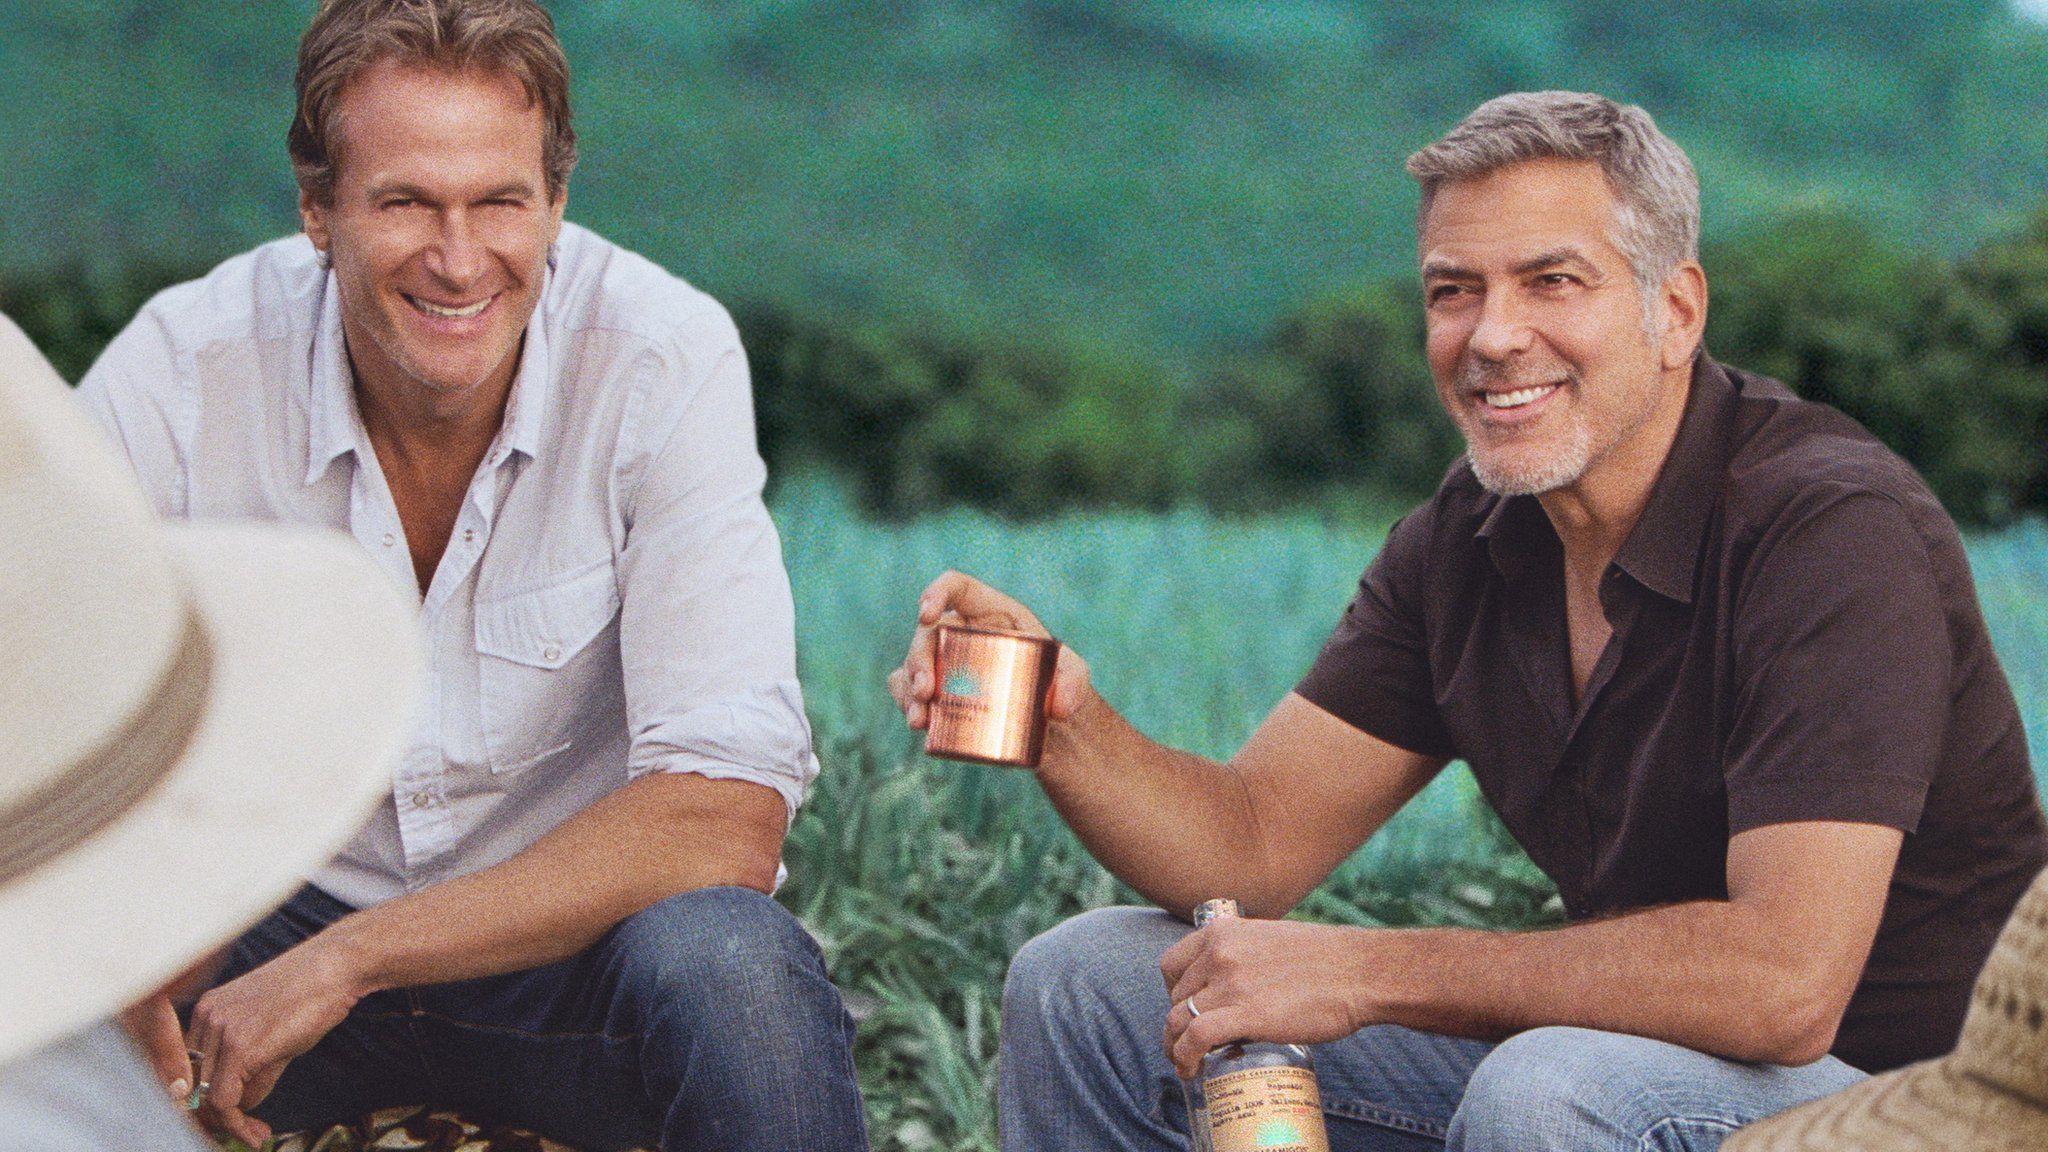 Rande Gerber and George Clooney in field of agave in promotional shot for Casamigos